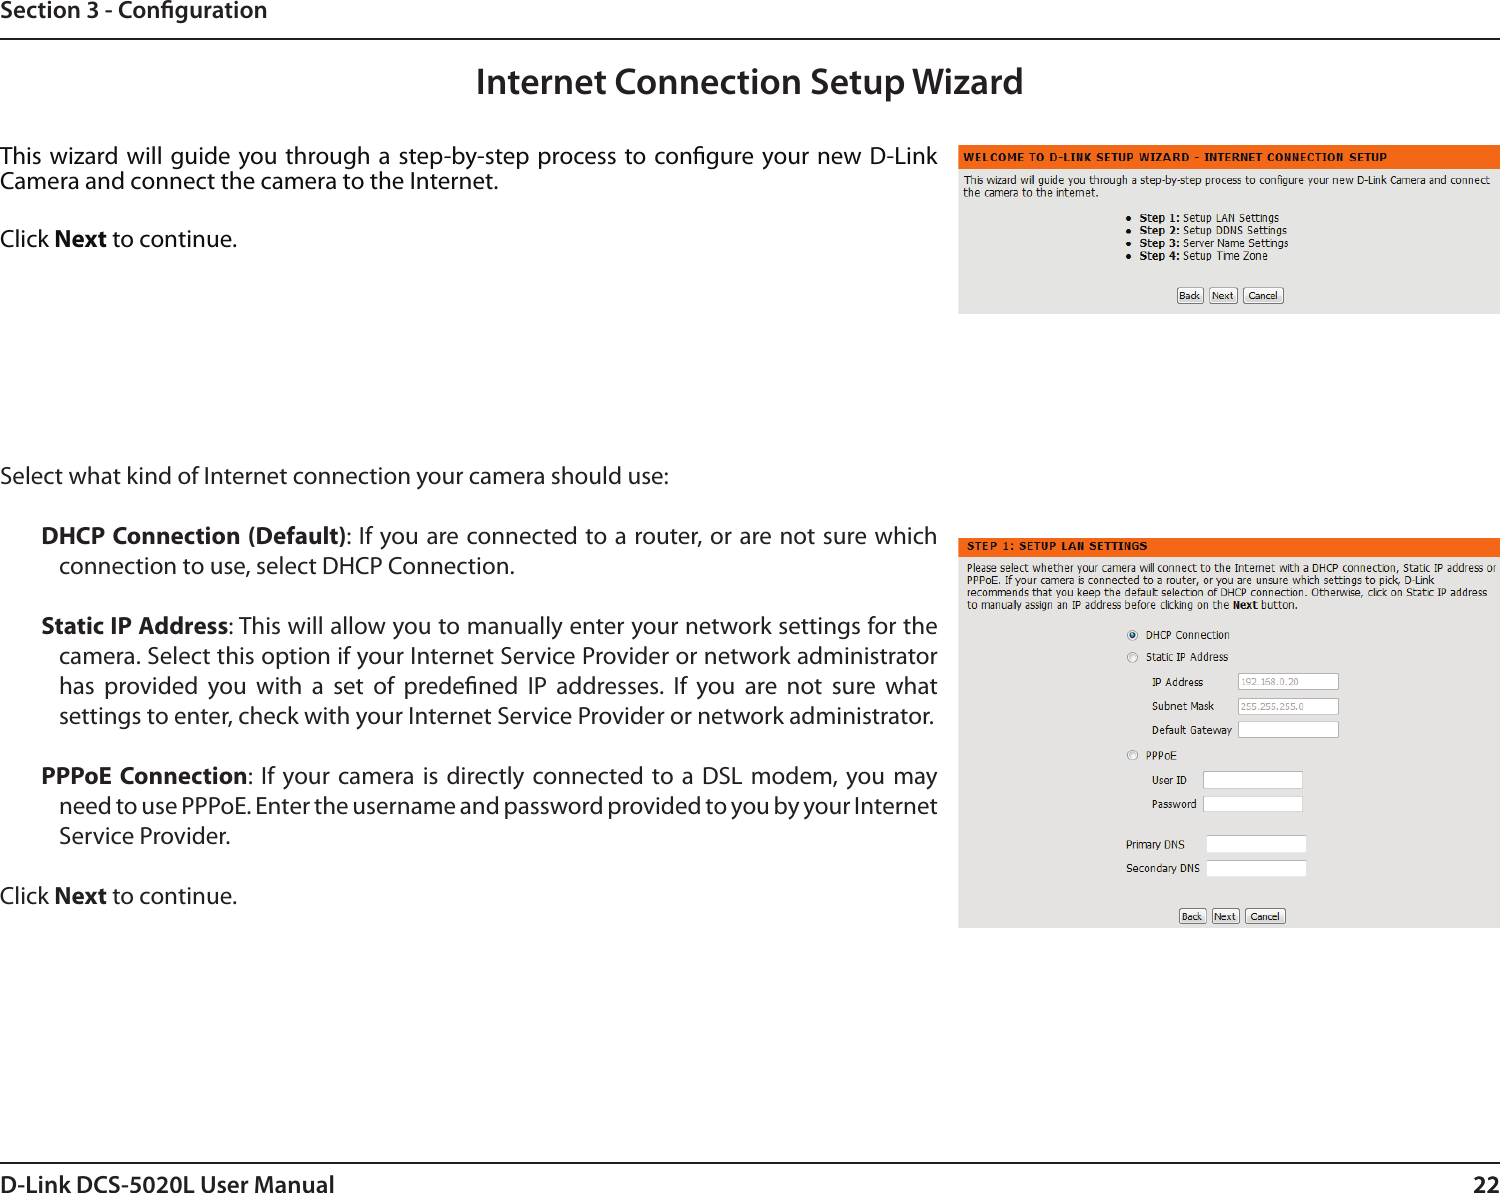 22D-Link DCS-5020L User Manual 22Section 3 - CongurationInternet Connection Setup WizardThis wizard will guide you through a step-by-step process to congure your new D-Link Camera and connect the camera to the Internet. Click Next to continue.Select what kind of Internet connection your camera should use:DHCP Connection (Default): If you are connected to a router, or are not sure which connection to use, select DHCP Connection.Static IP Address: This will allow you to manually enter your network settings for the camera. Select this option if your Internet Service Provider or network administrator has  provided  you  with  a  set  of  predened  IP  addresses.  If  you  are  not  sure  what settings to enter, check with your Internet Service Provider or network administrator.PPPoE Connection:  If  your camera  is  directly connected to  a DSL  modem,  you may need to use PPPoE. Enter the username and password provided to you by your Internet  Service Provider.Click Next to continue.